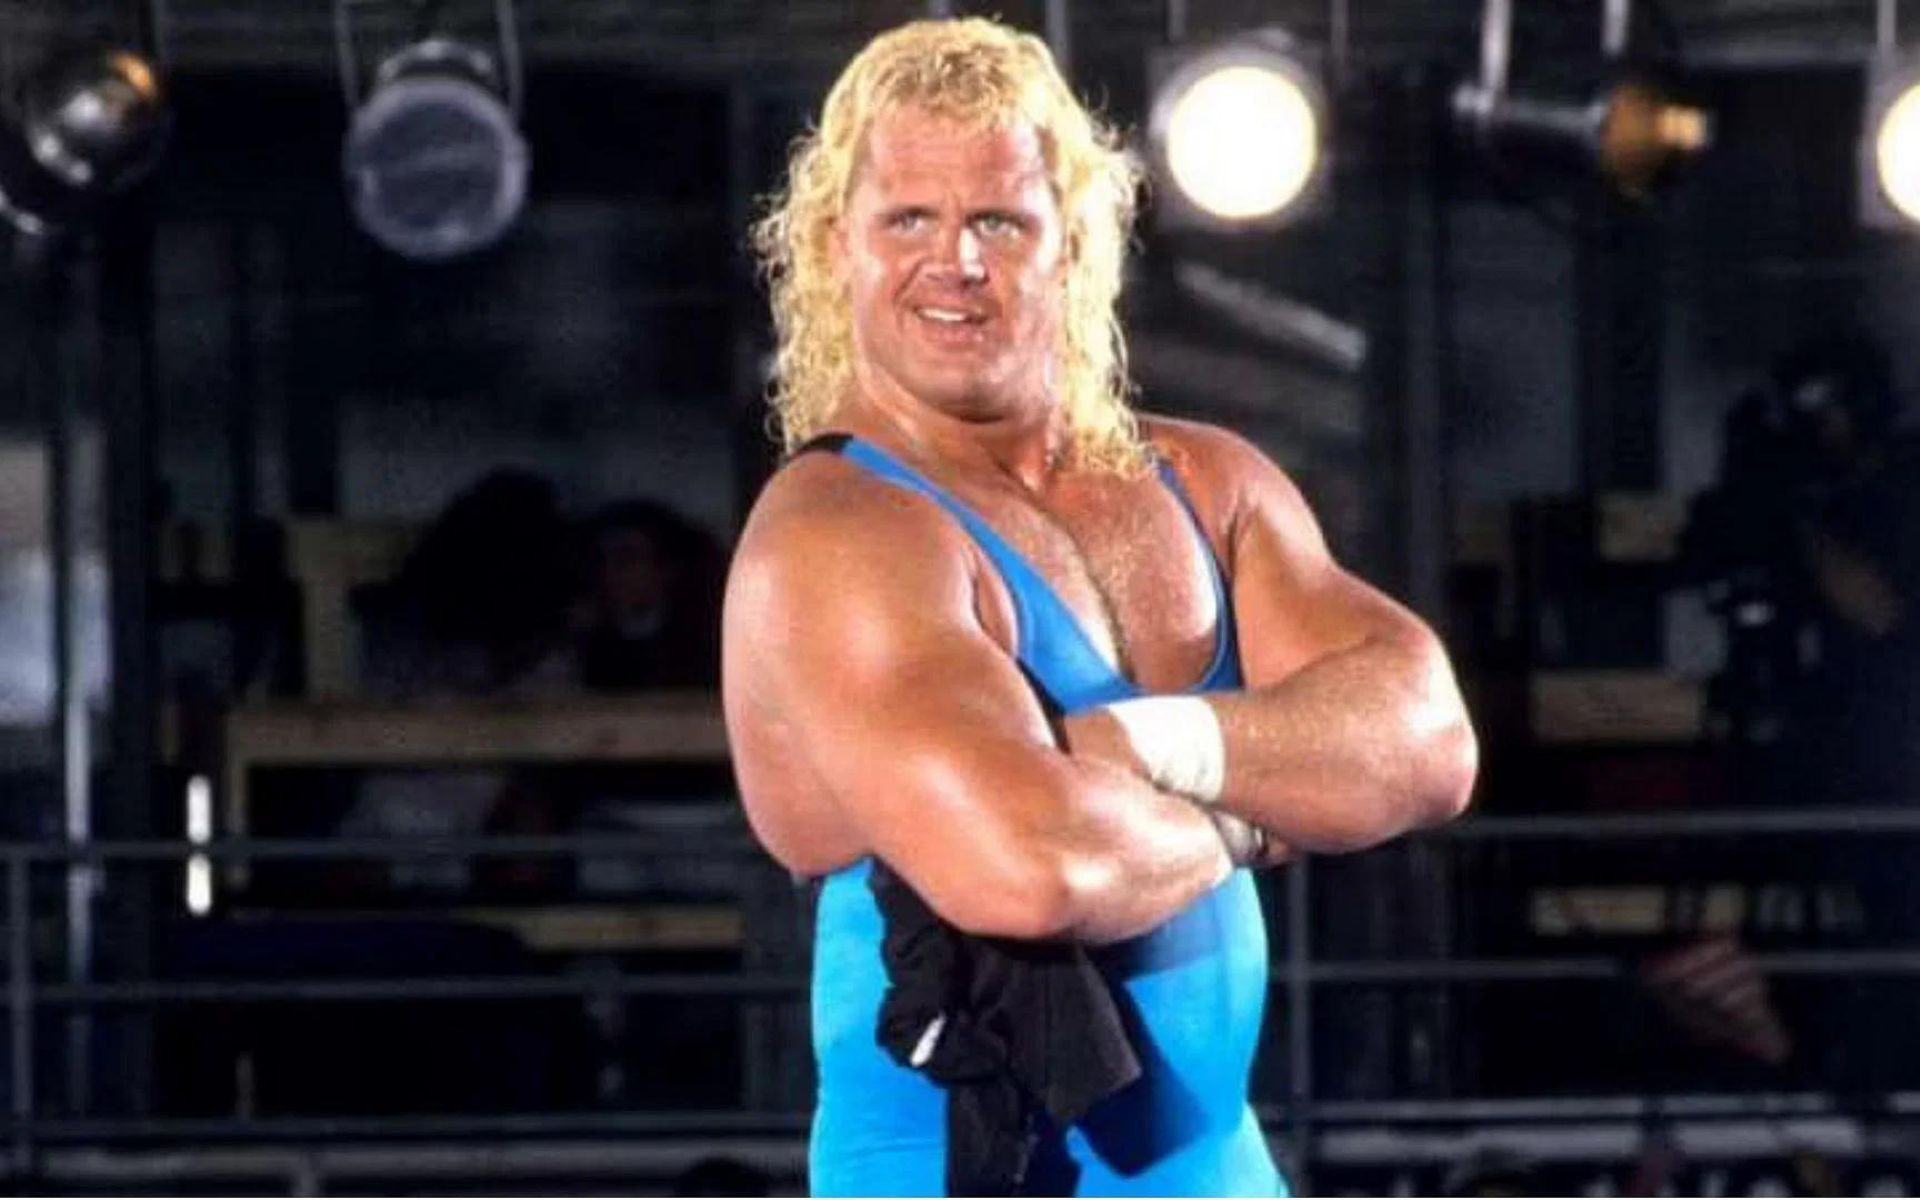 Curt Hennig was perfection personified!